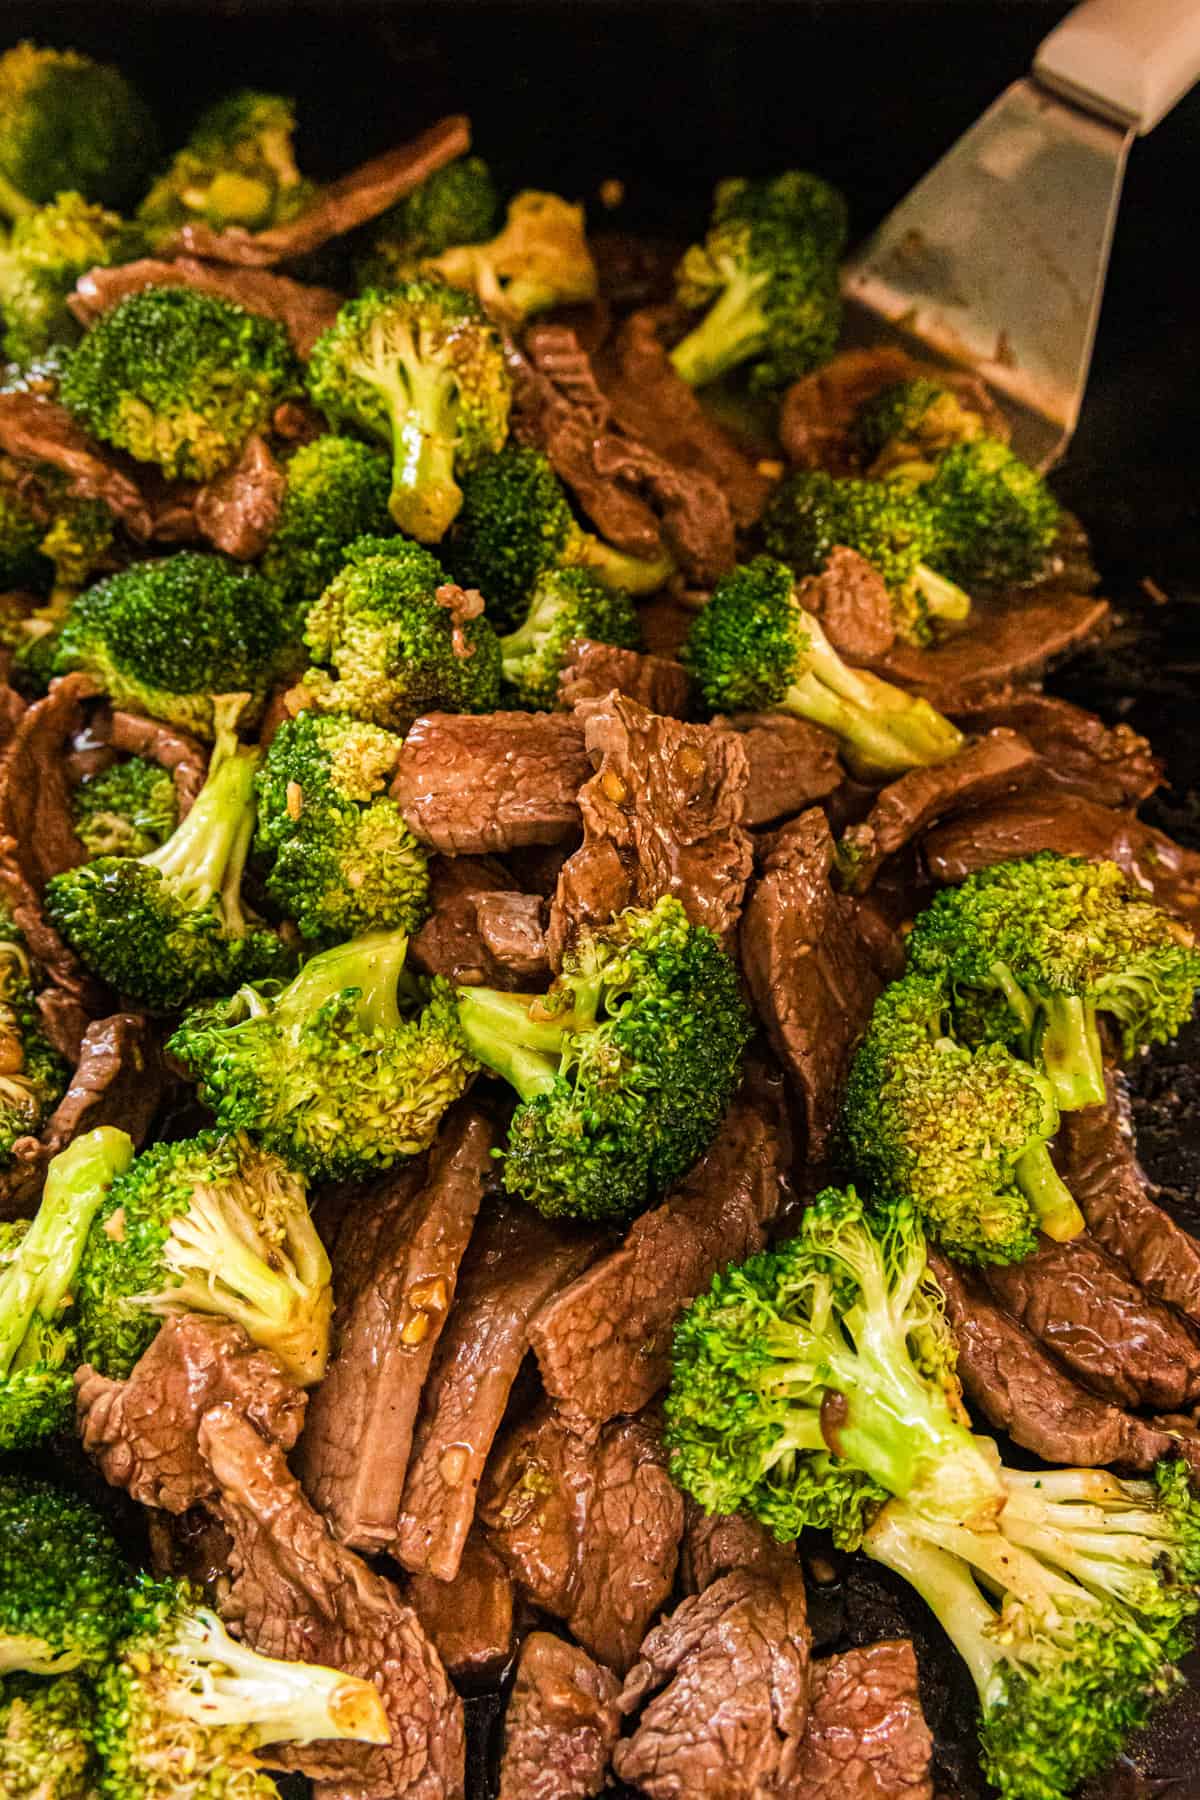 Beef and Broccoli on Blackstone combined and cooked